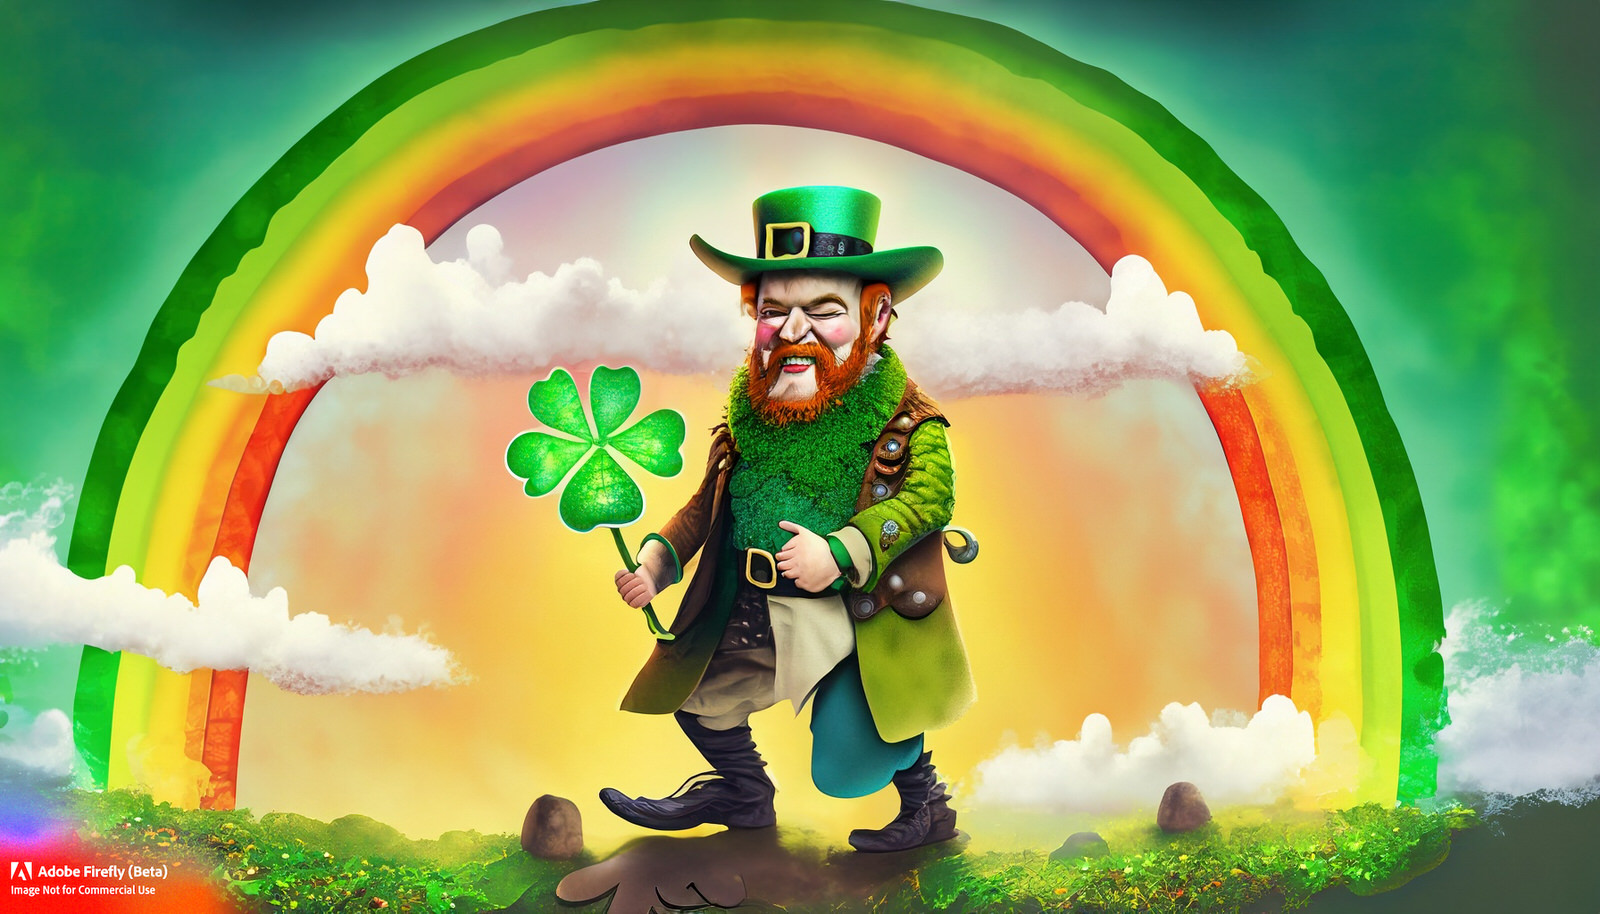 IF YOU ASK ADOBE FIREFLY TO GENERATE AN IMAGE OF A LEPRECHAUN